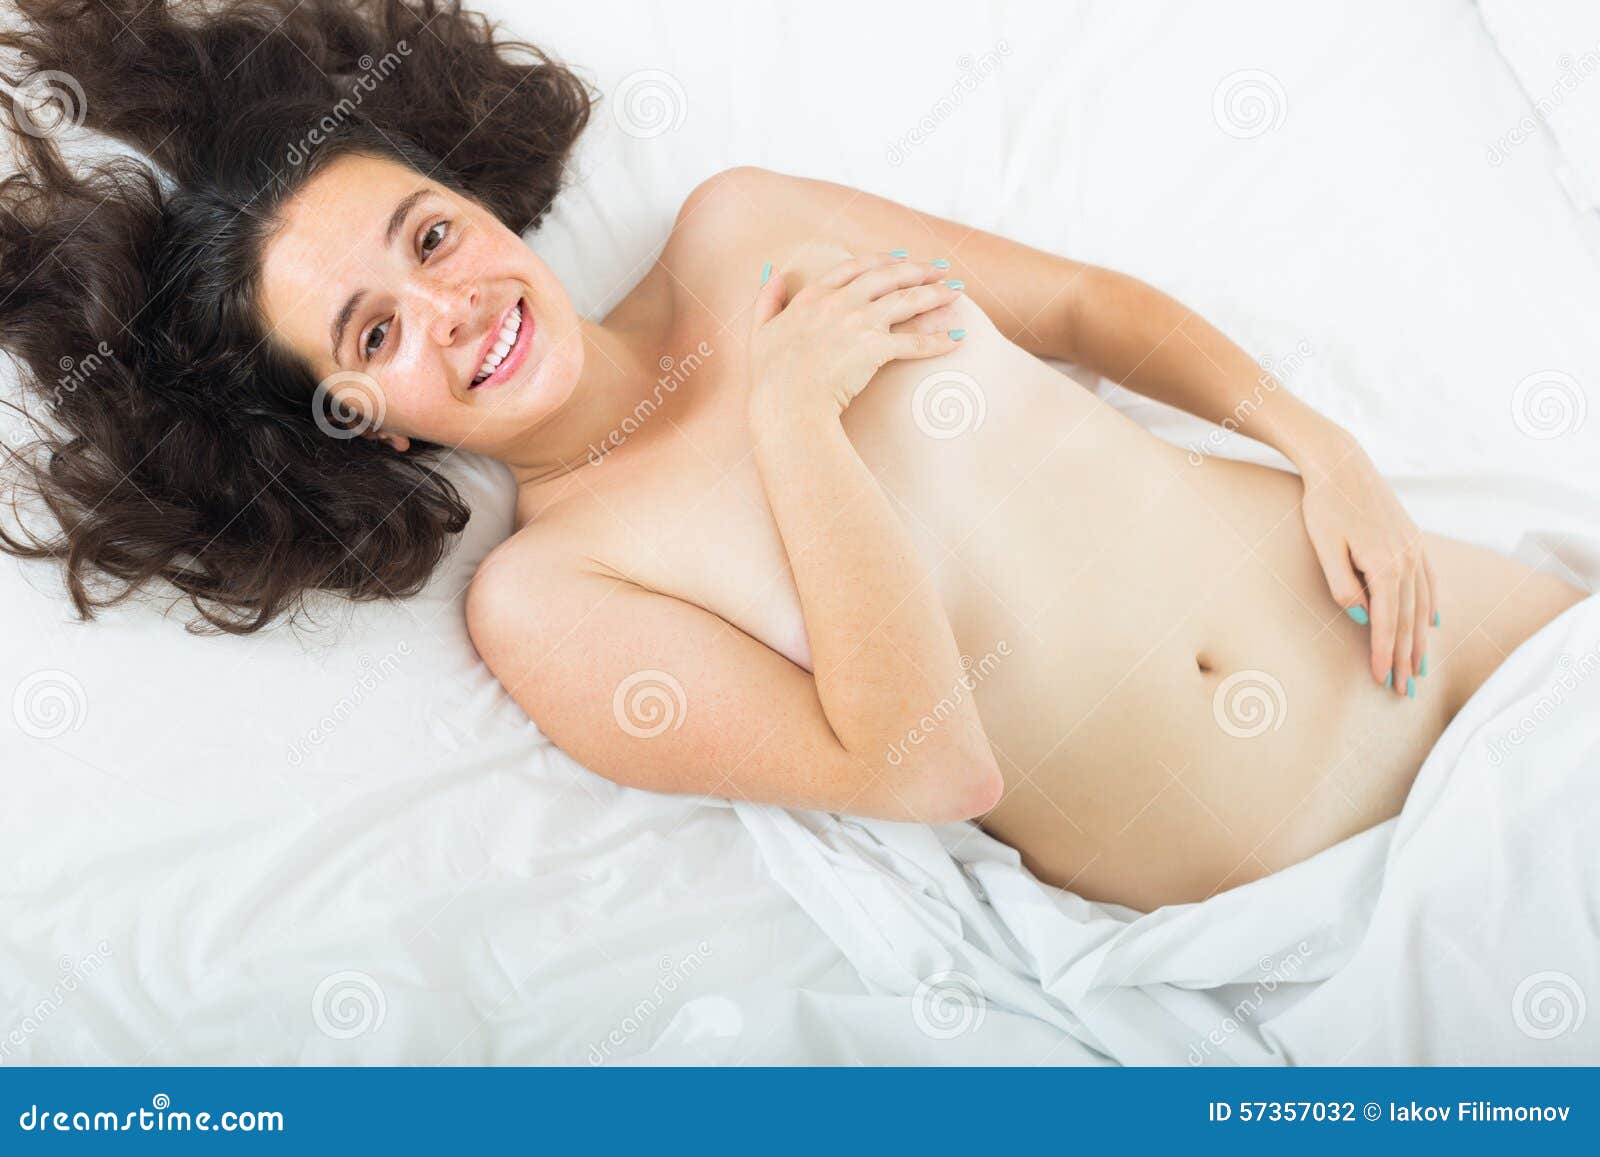 Nude Girl On Bed At Bedroom Stock Photo Image Of Portrait